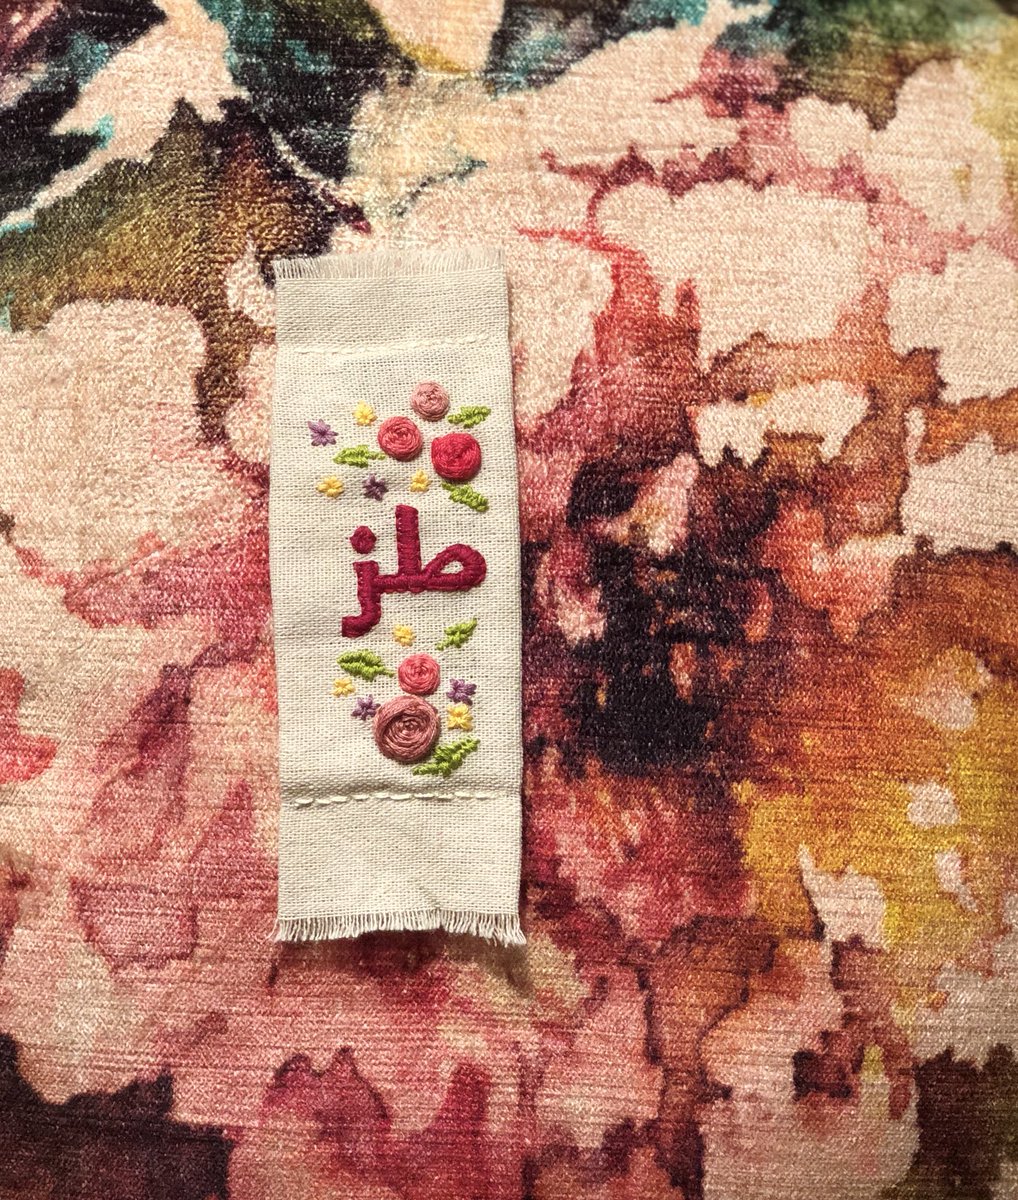 It’s a little messy, but طز #EmbroideryProject